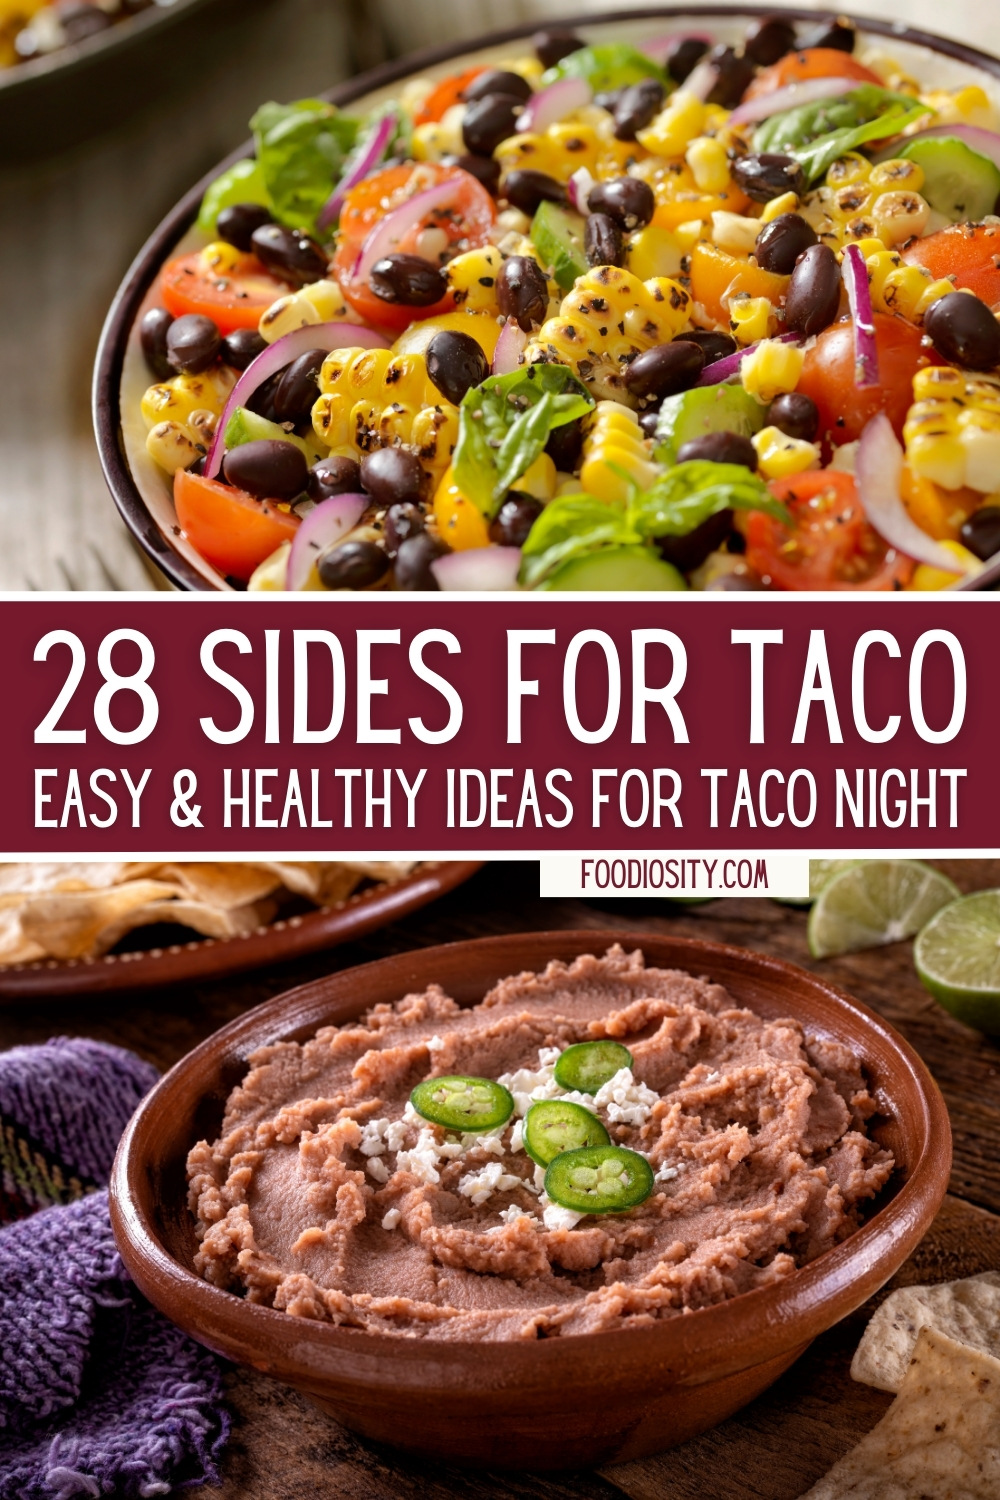 28 sides for taco easy healthy taco night 1